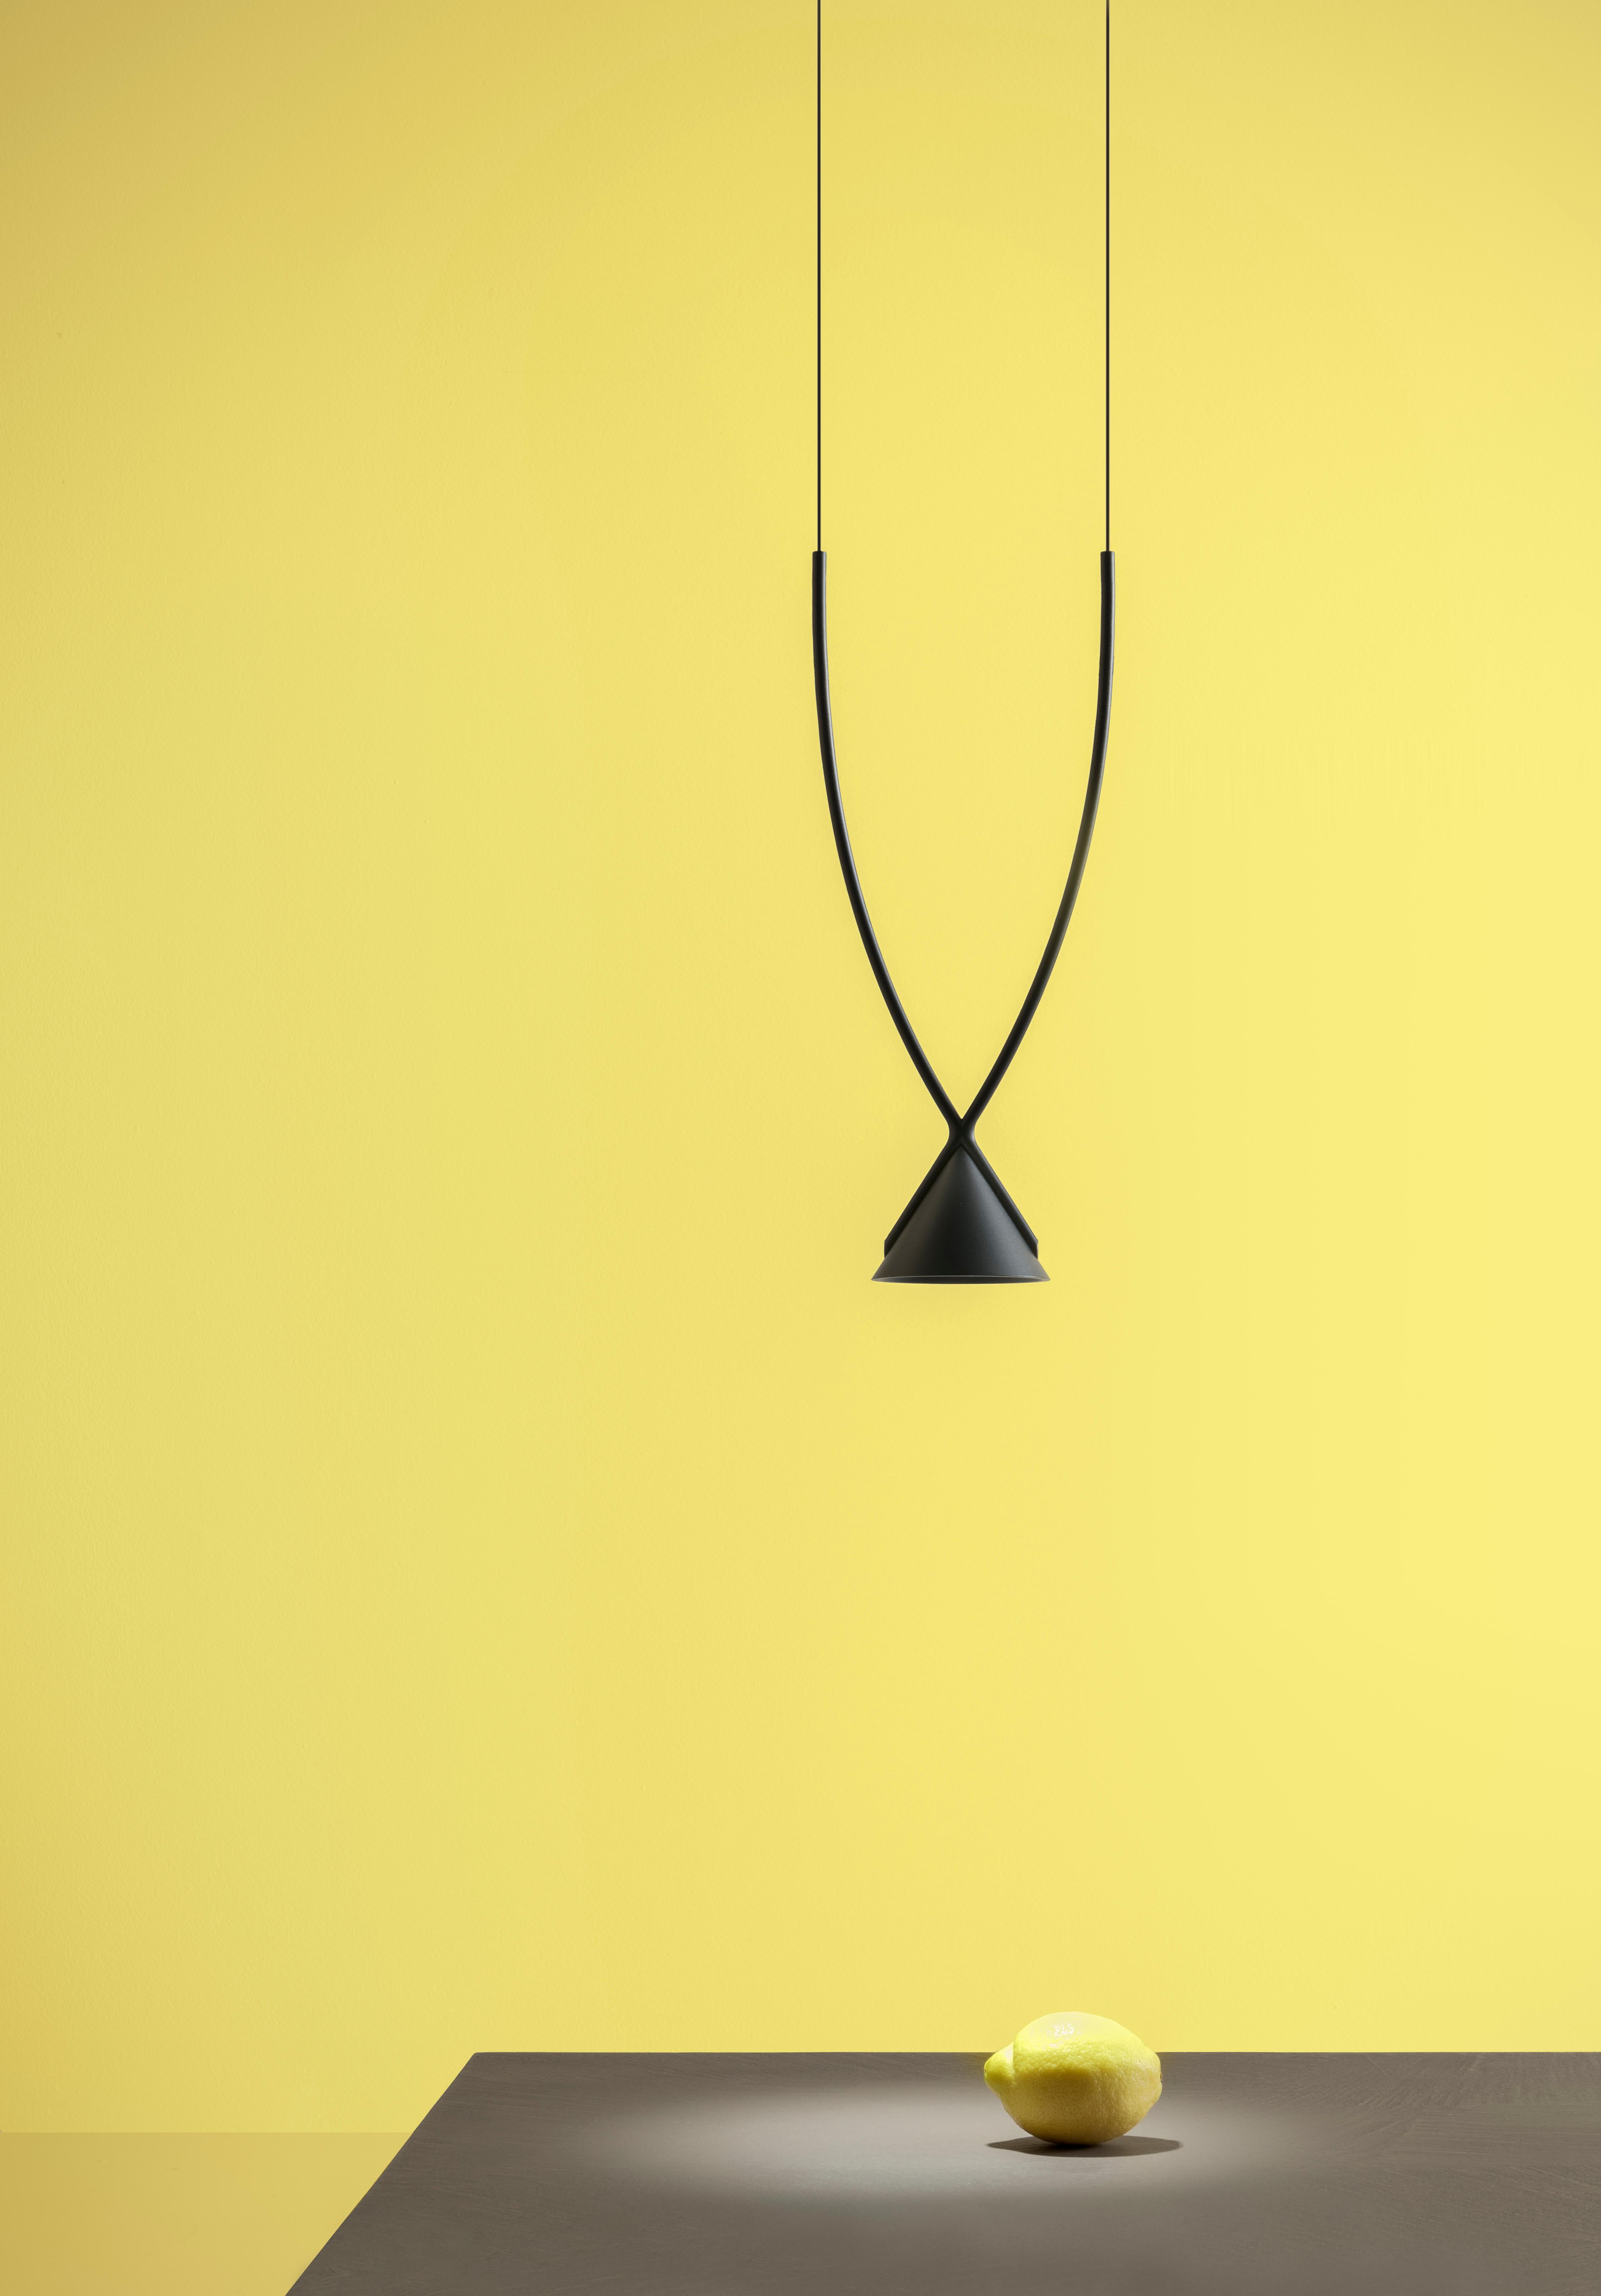 Axolight Jewel Small Pendant Lamp in Greige with Black Finish by Yonoh

Synthesizing is the gift of knowing how to transmit complex things in a simple way. Jewel mono summarizes: minimalism in design and high lighting performance, aesthetic elegance